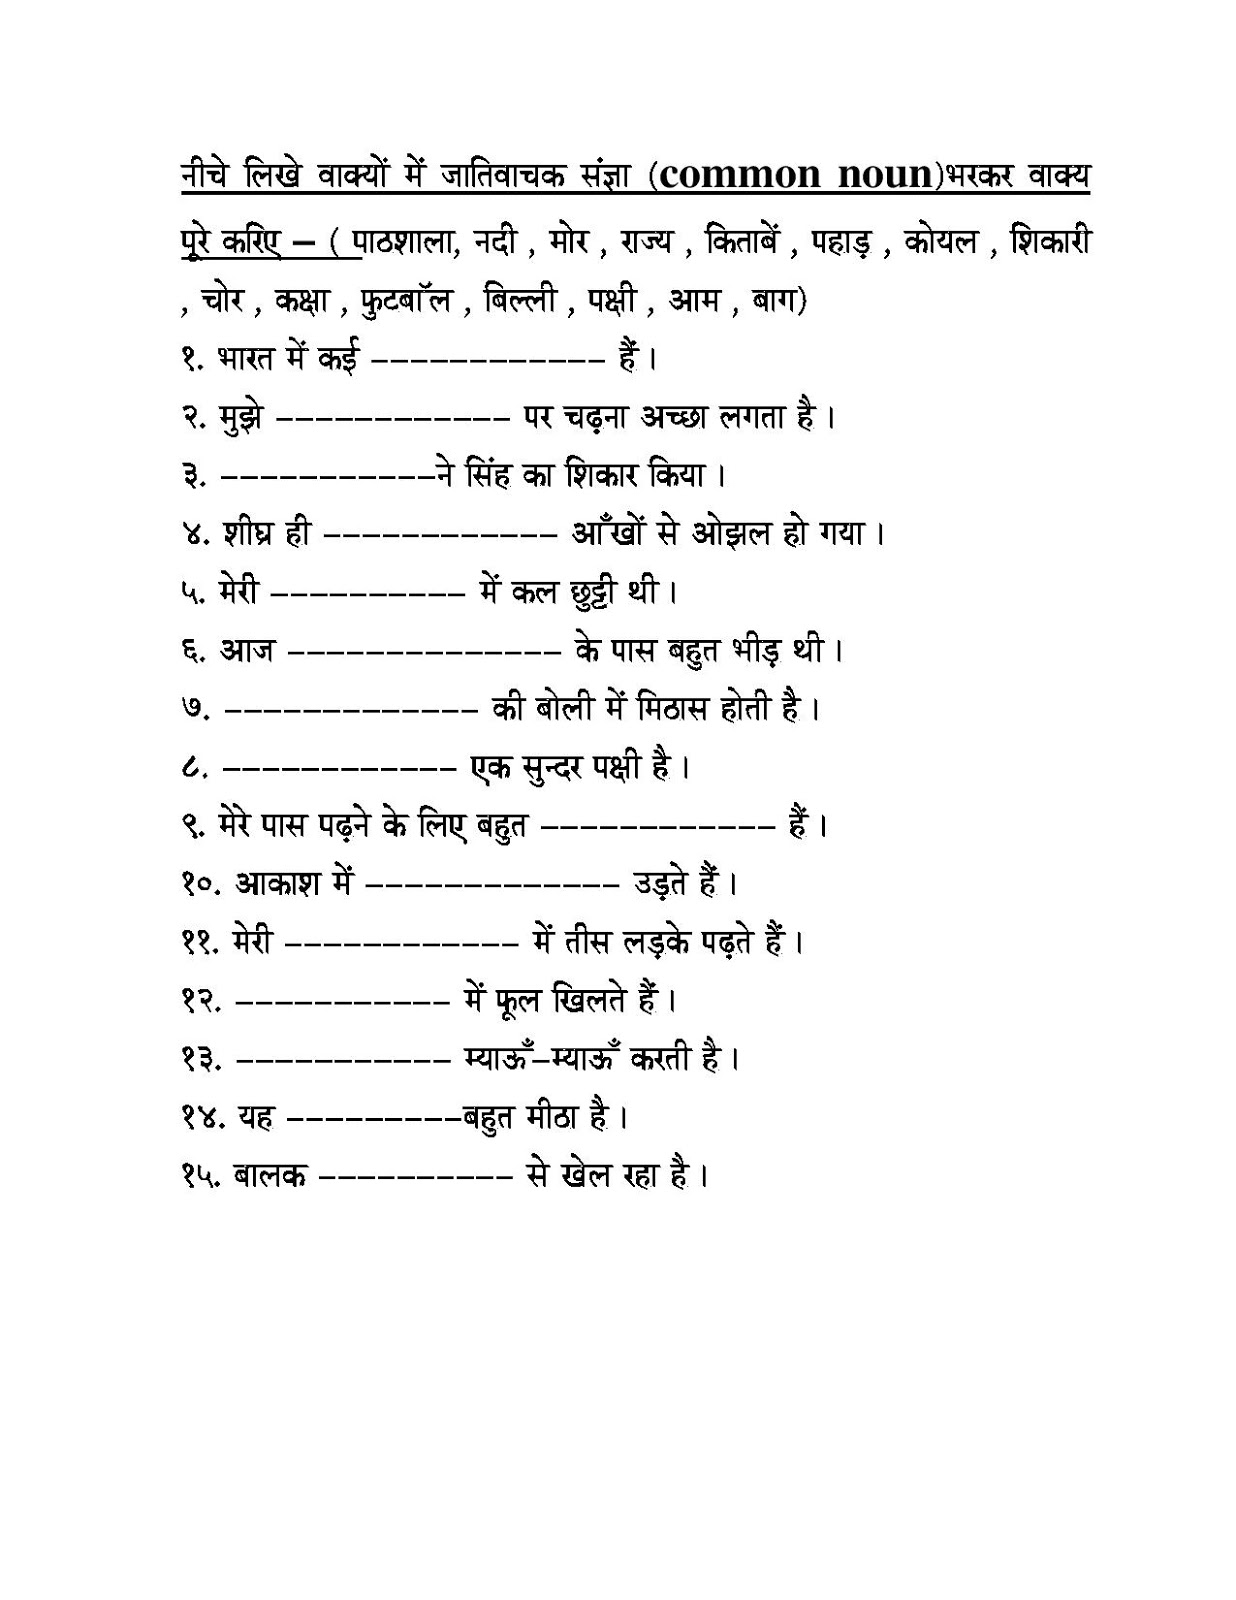 5th-grade-hindi-grammar-worksheets-for-class-5-with-answers-tutore